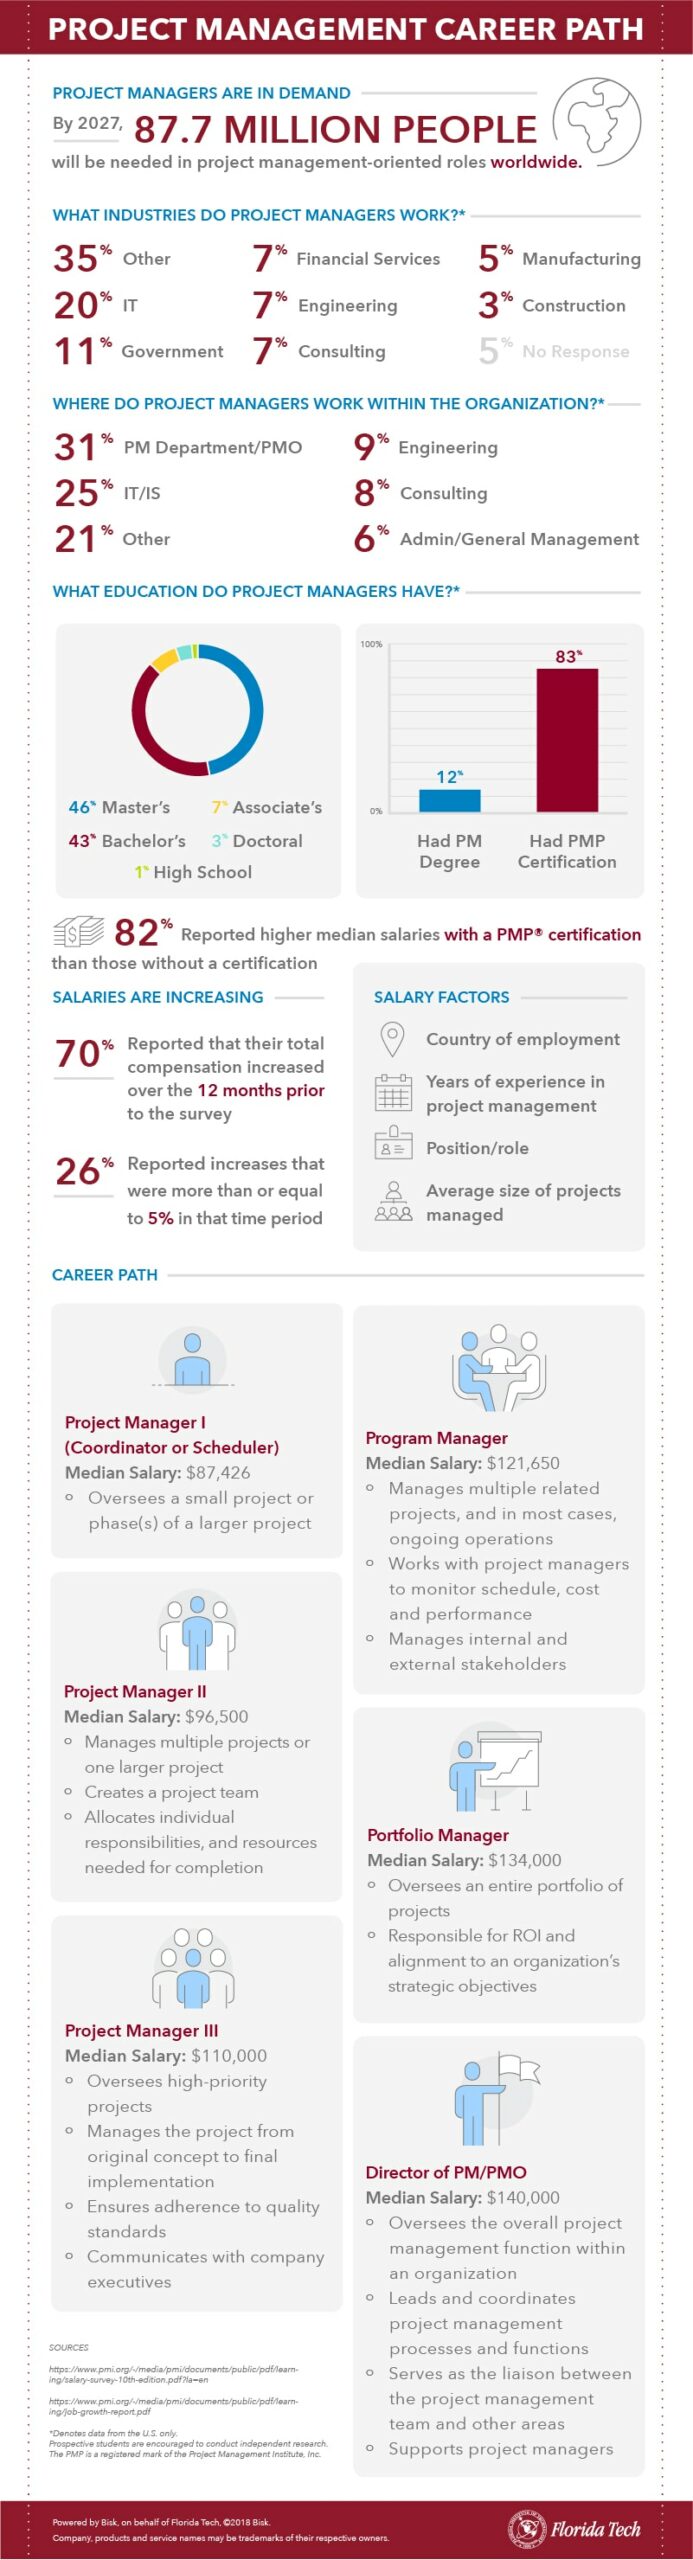 Project Management Careers Infographic